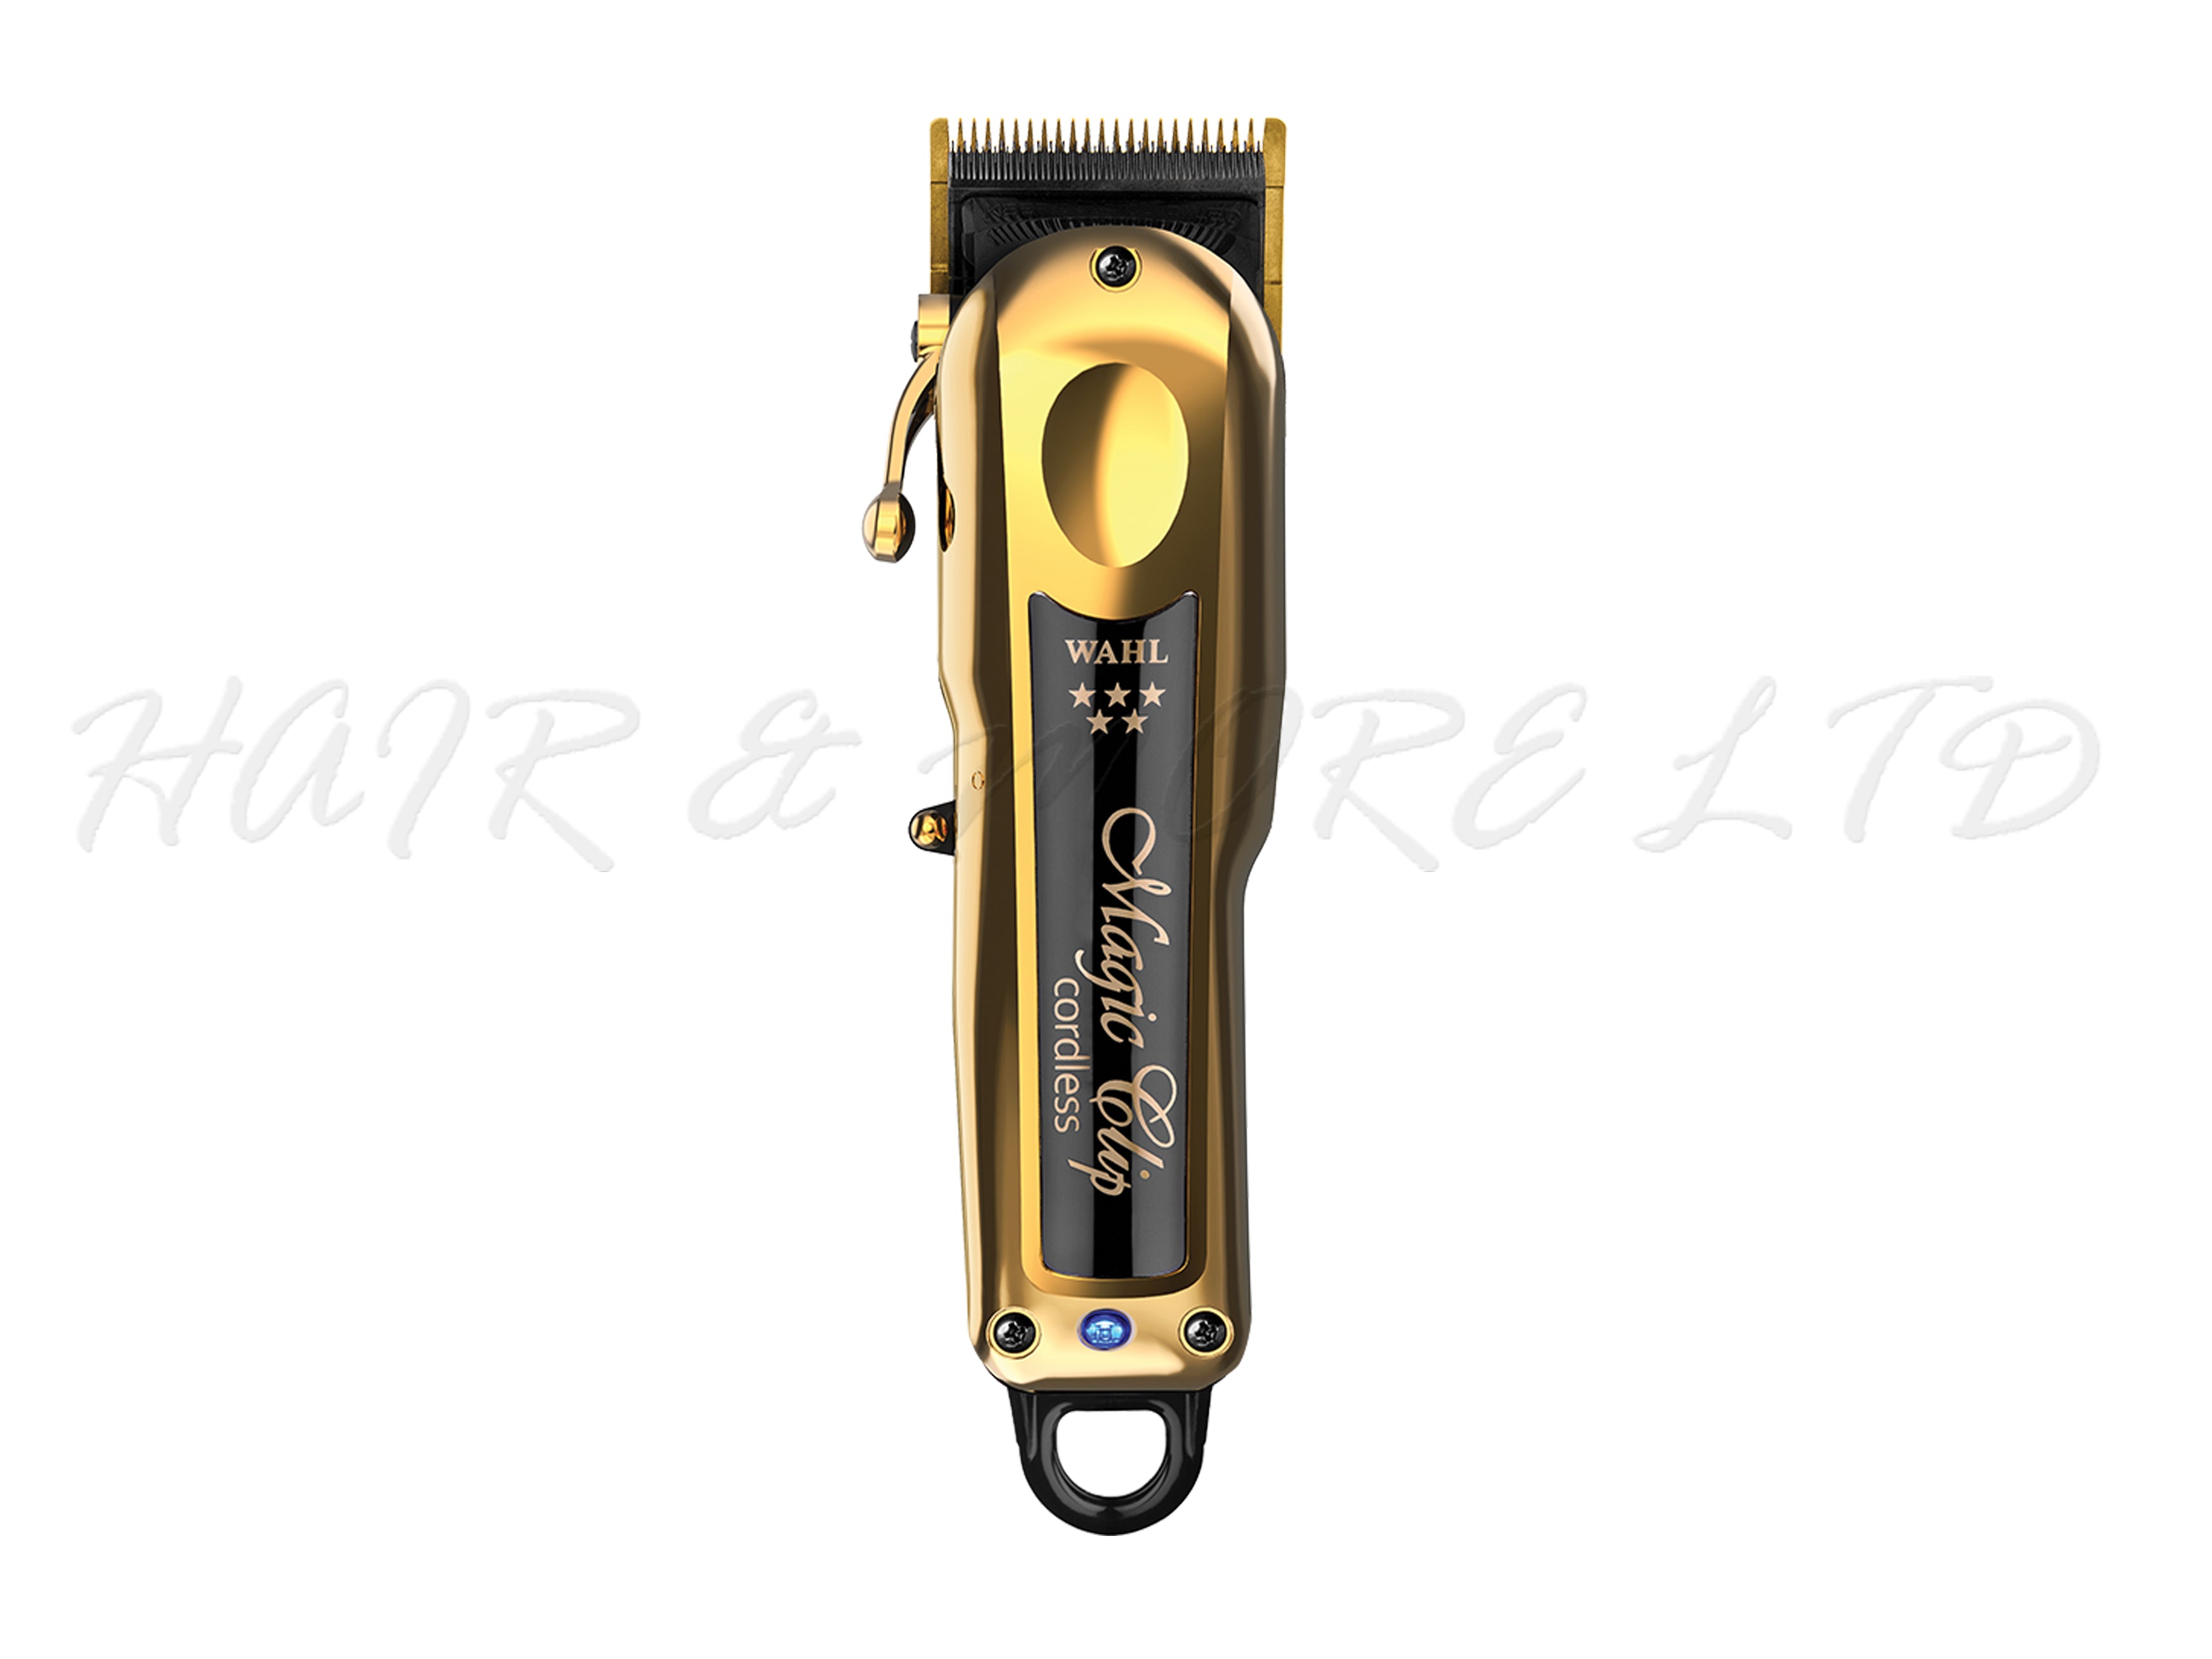 WAHL Professional 5 Star GOLD Series